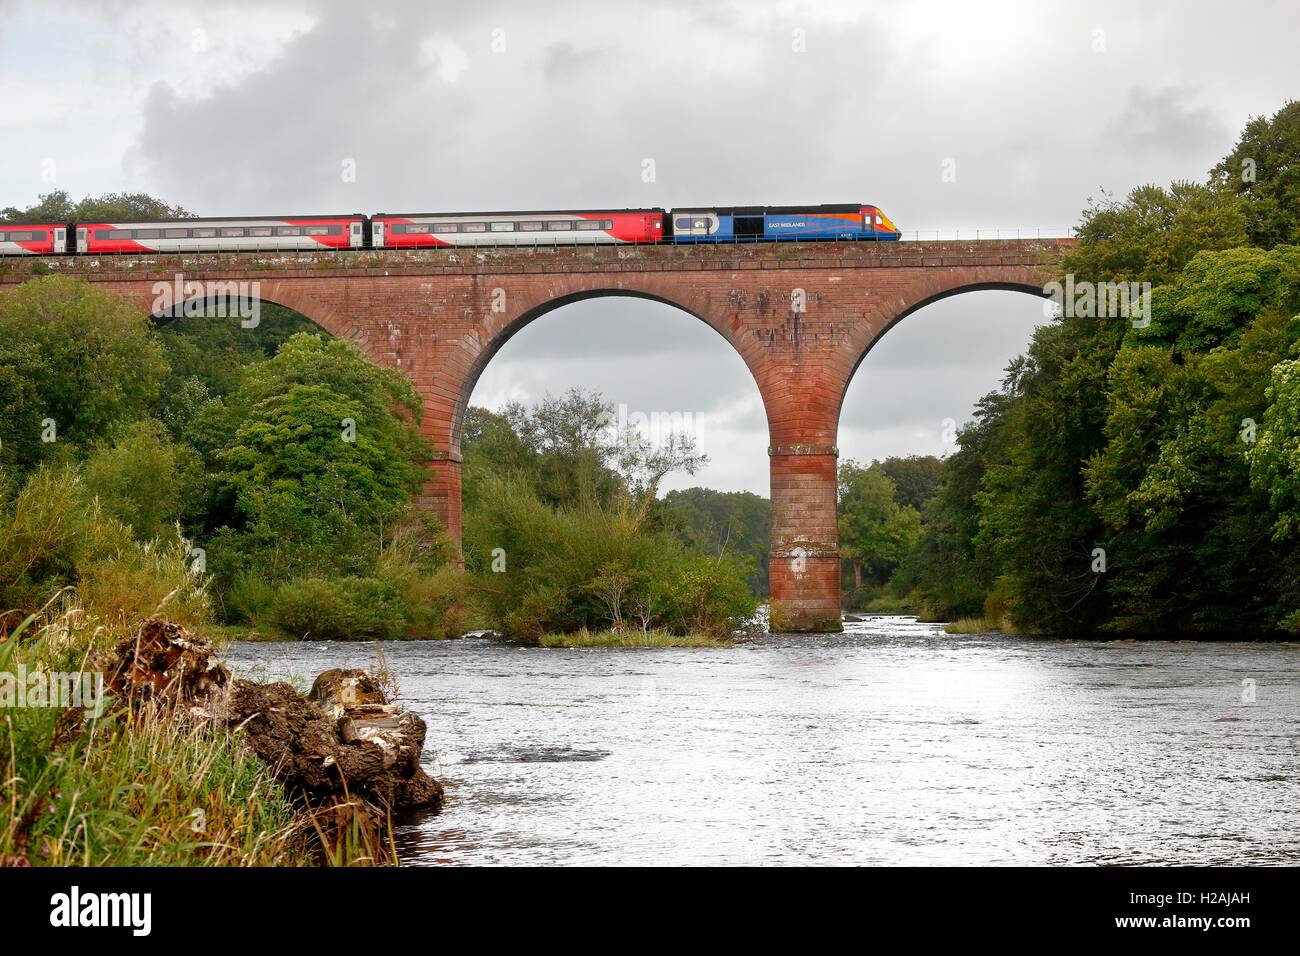 East Midlands Trains InterCity 125 crossing Wetheral Viaduct over the River Eden. Wetheral, Newcastle & Carlisle Railway, UK. Stock Photo